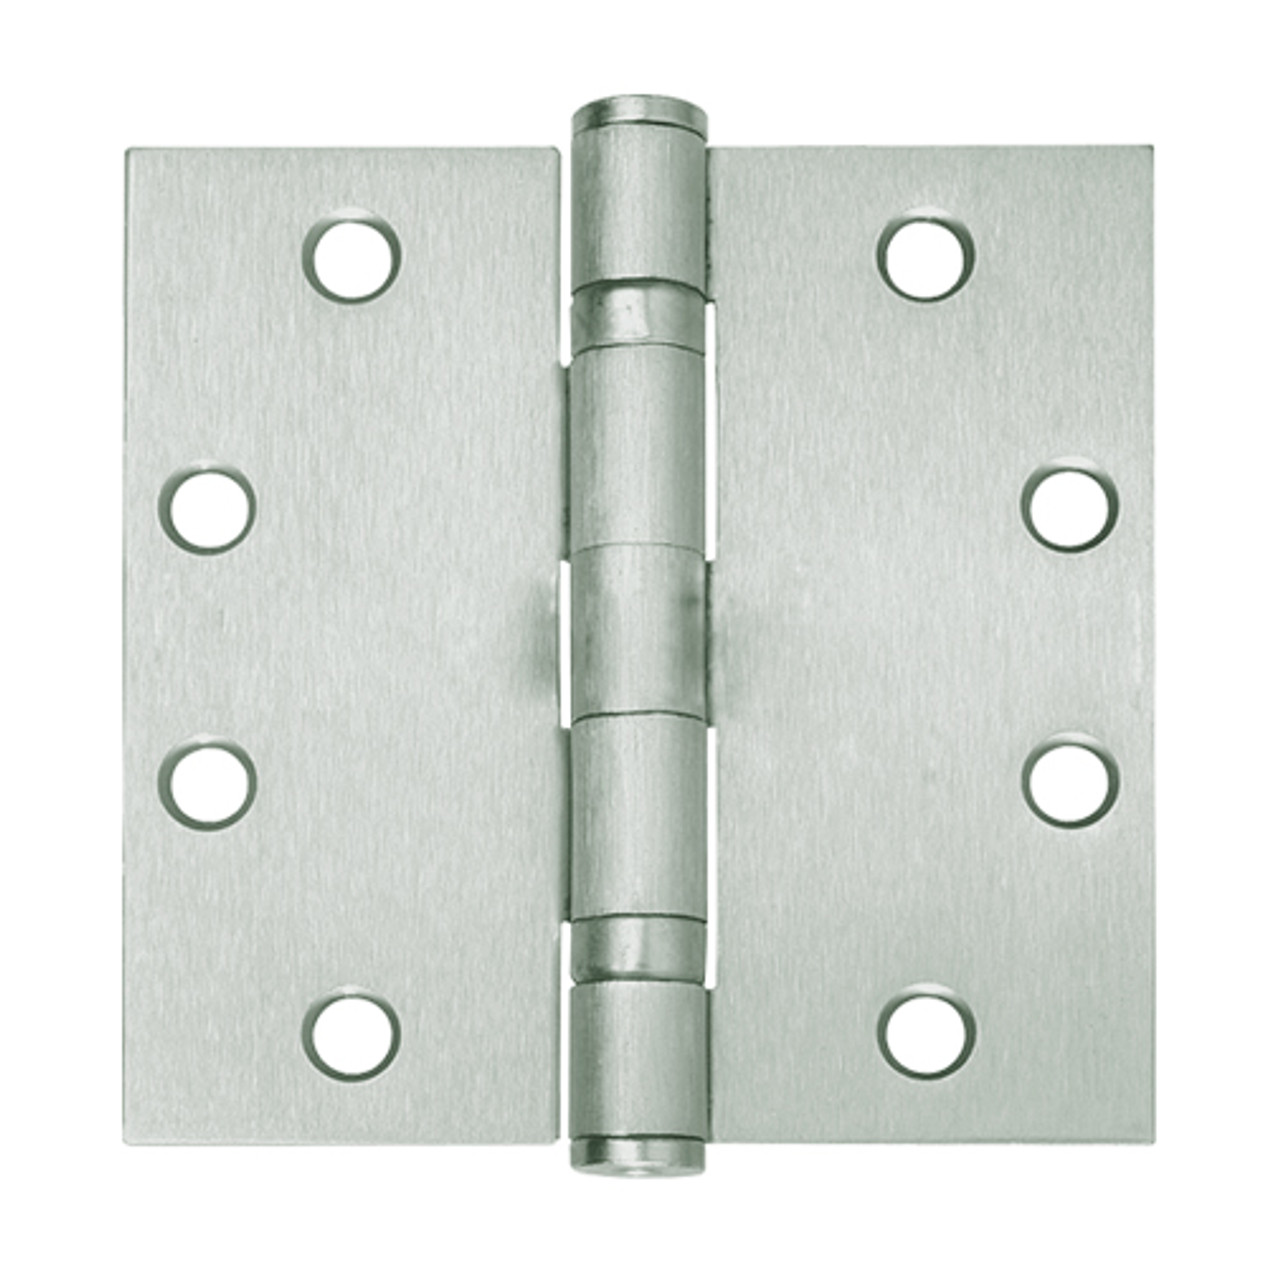 5BB1-4-5x4-619 IVES 5 Knuckle Ball Bearing Full Mortise Hinge in Satin Nickel